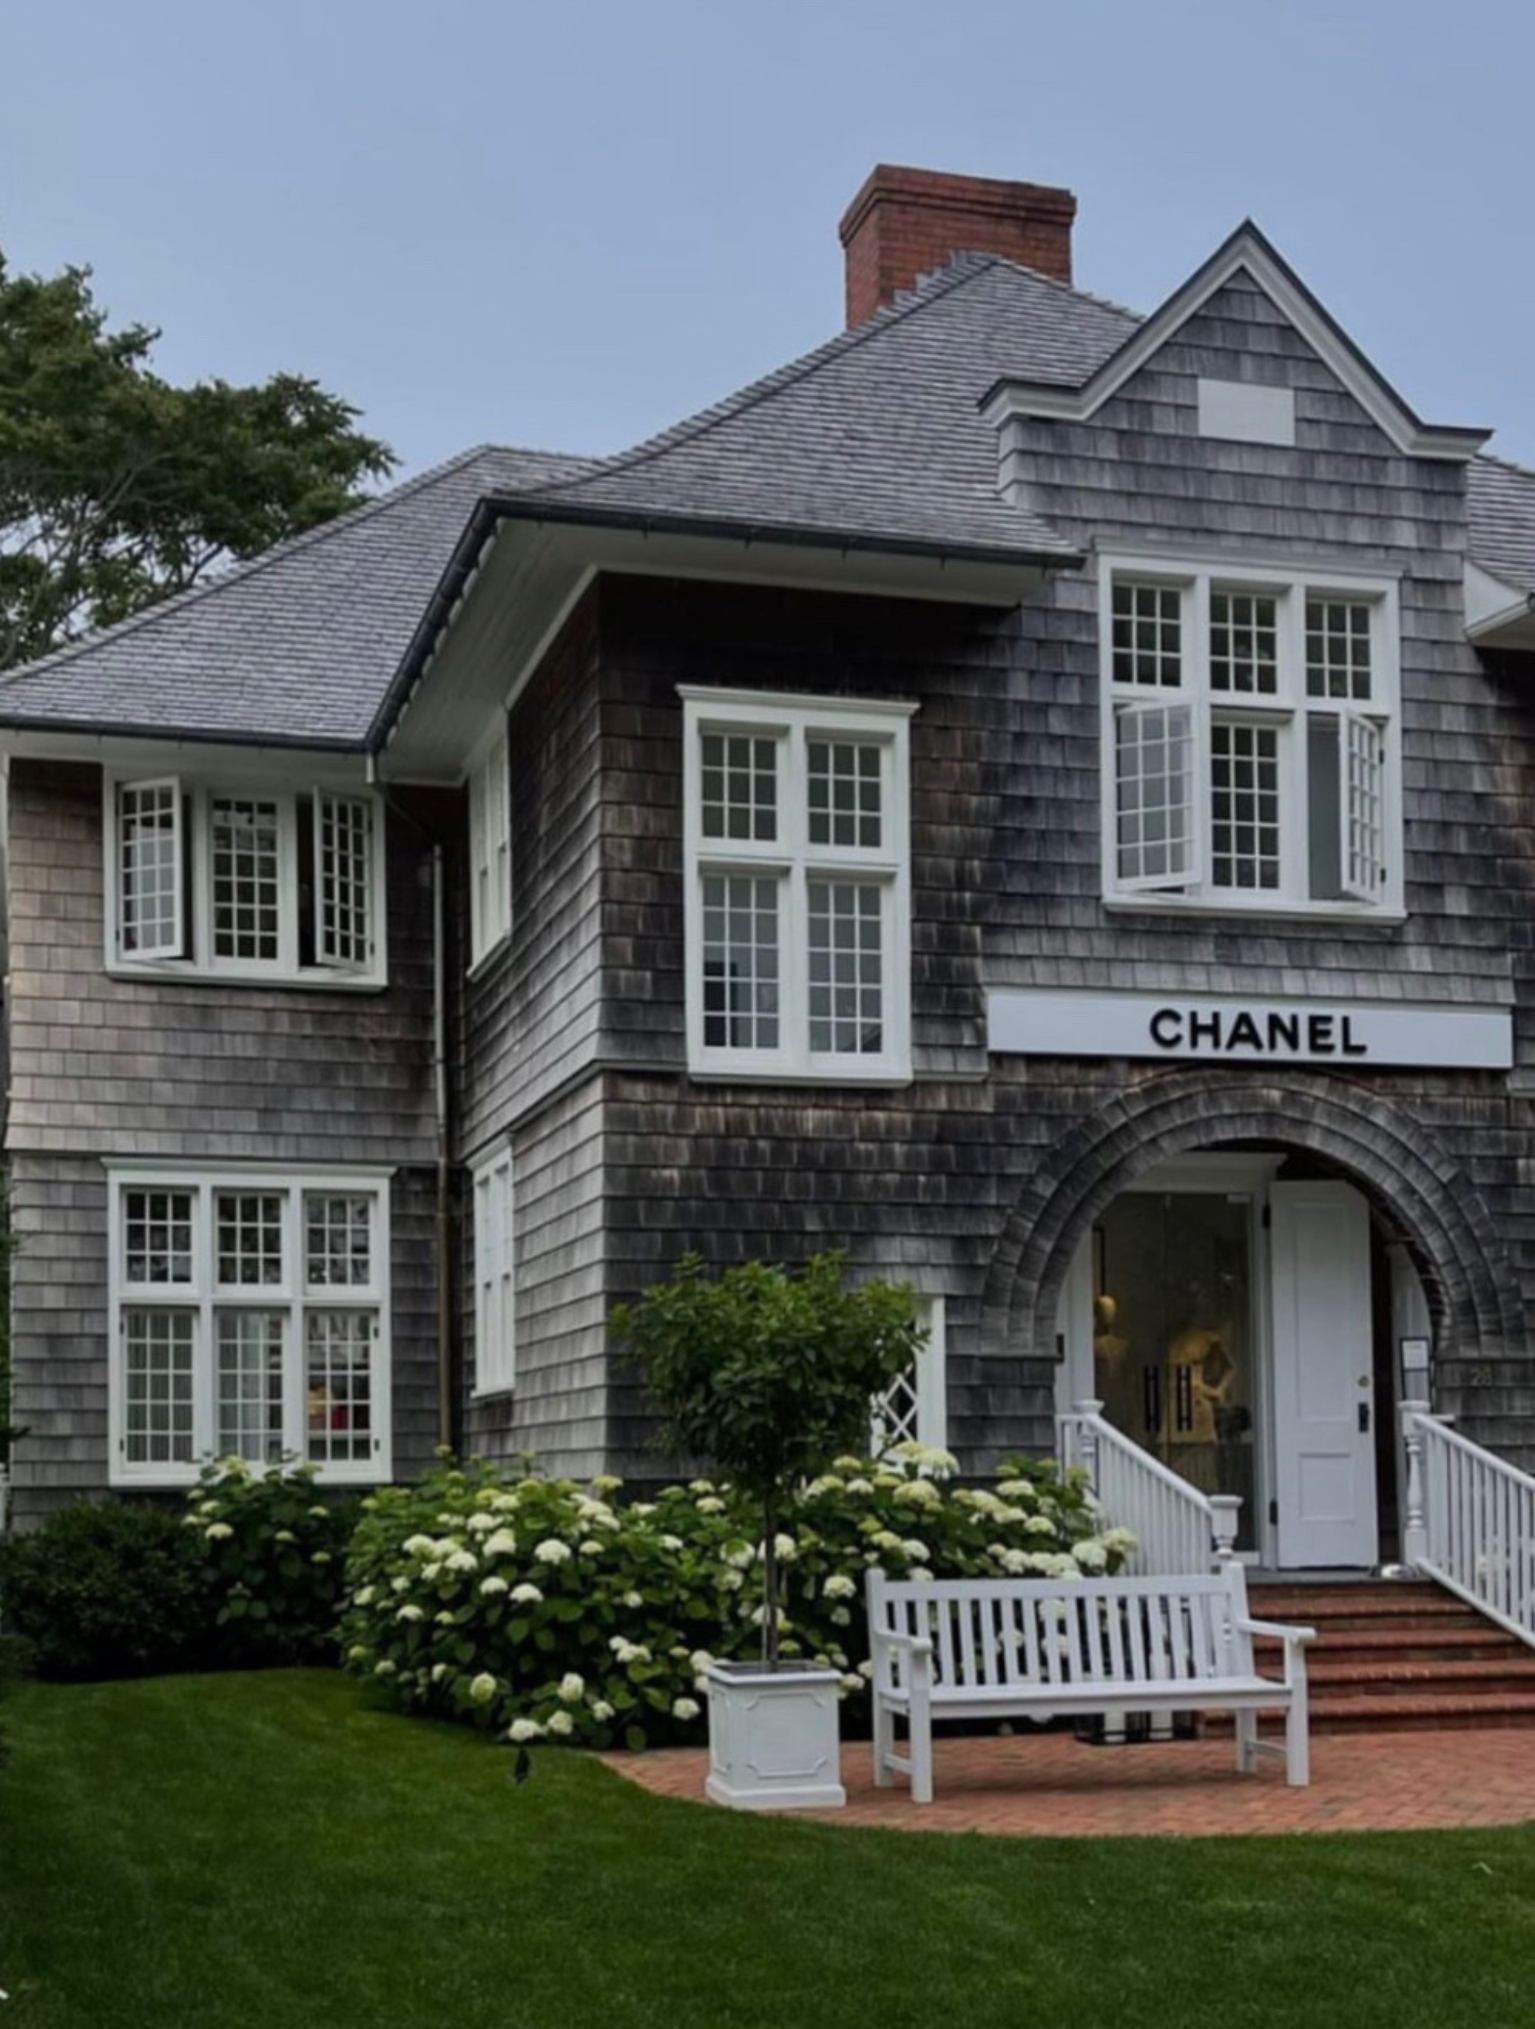 Shari's Guide to the Hamptons – Concept26